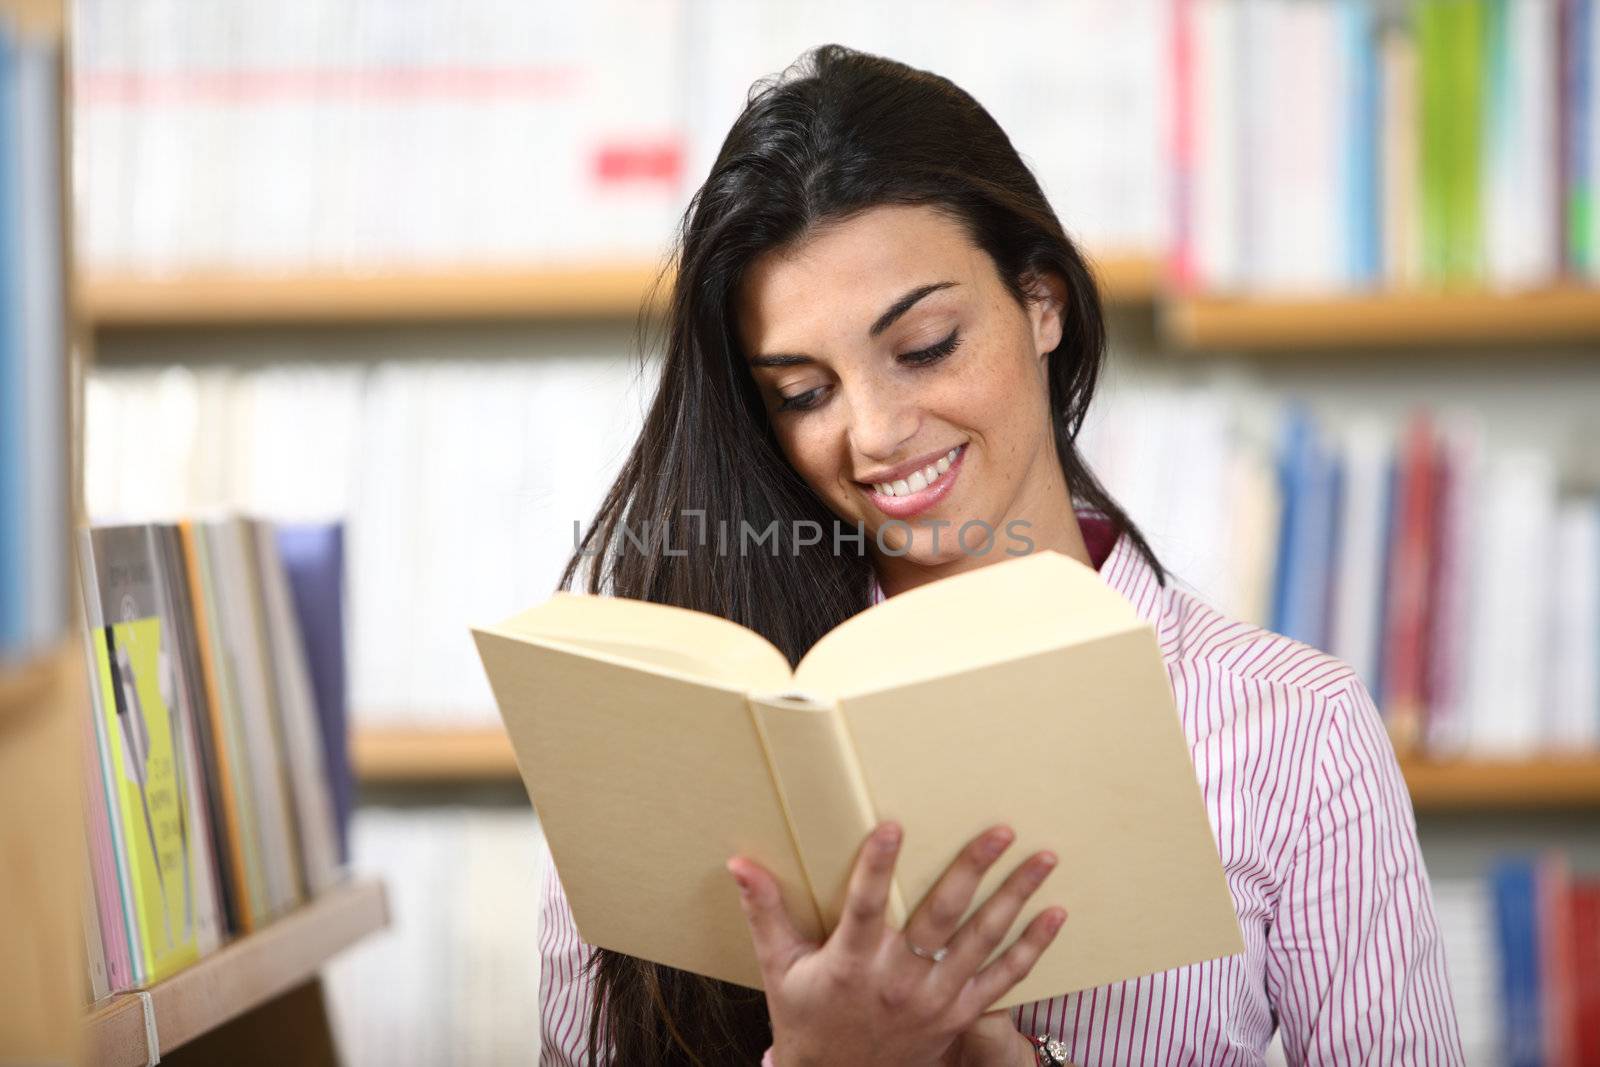 smiling female student with book in hands in a bookstore by stokkete